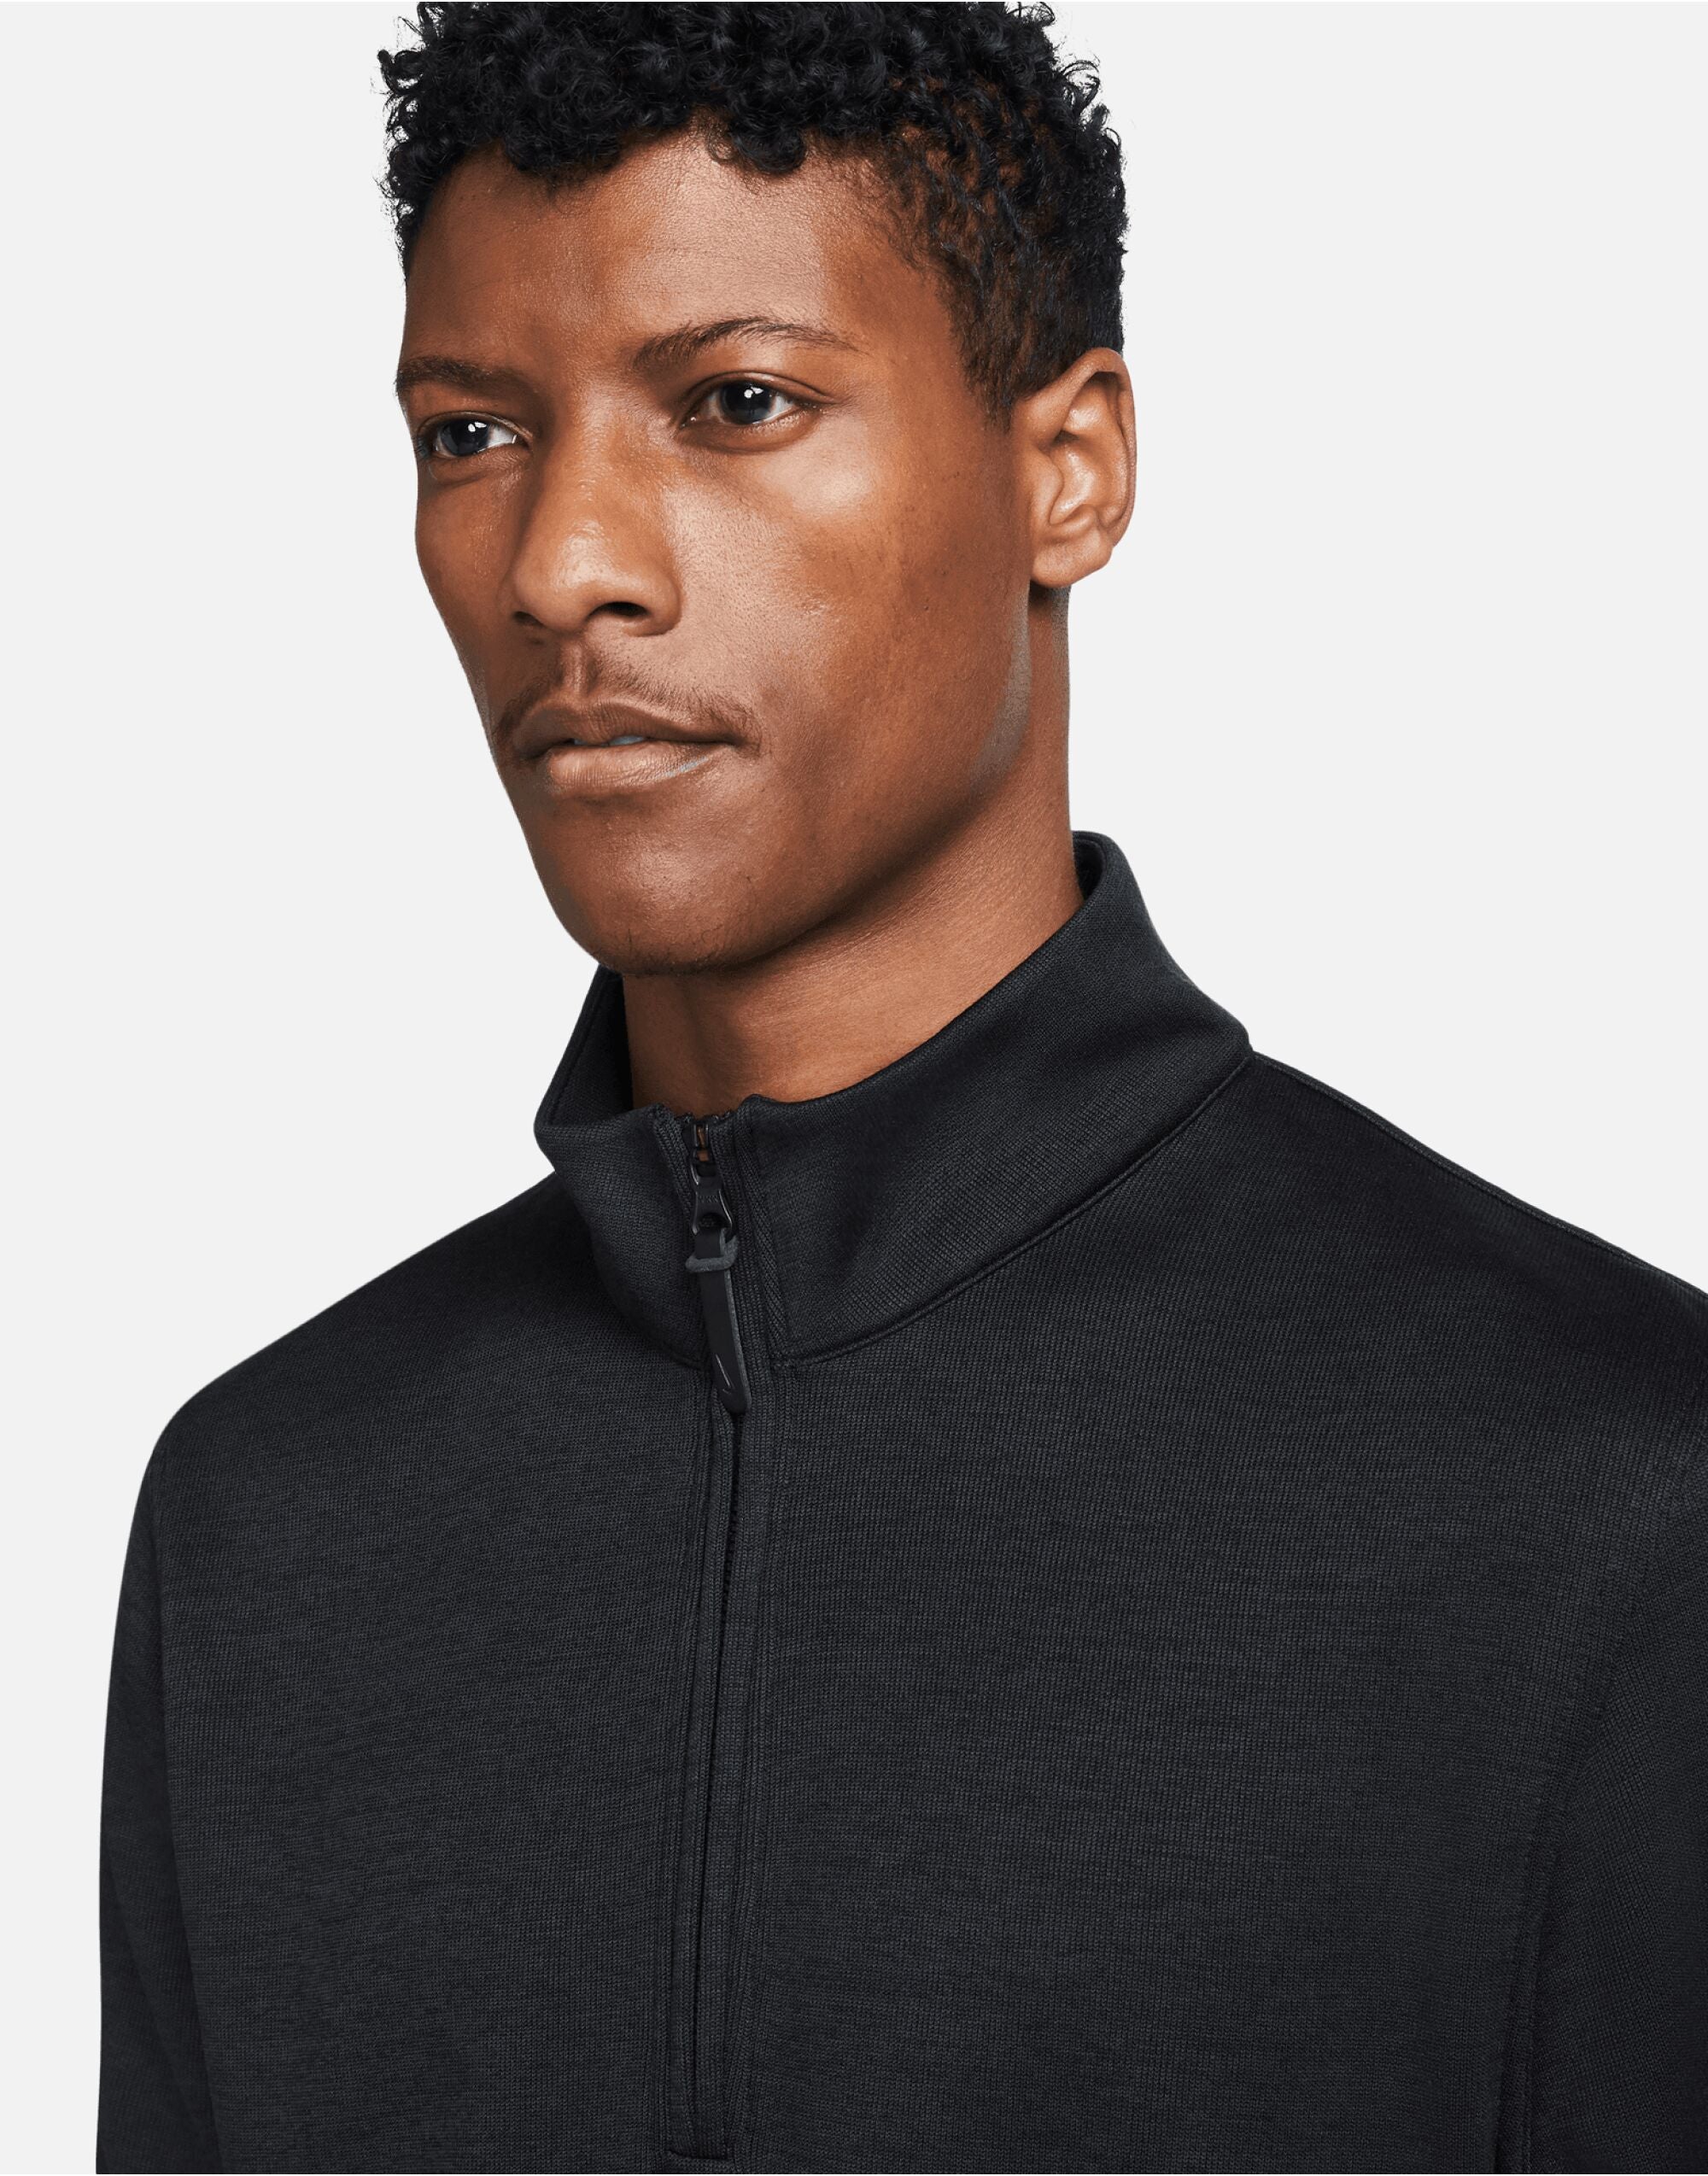 Nike Golf Dri-FIT Player Half Zip Top Technology helping you stay dry and comfortable (DH0986)